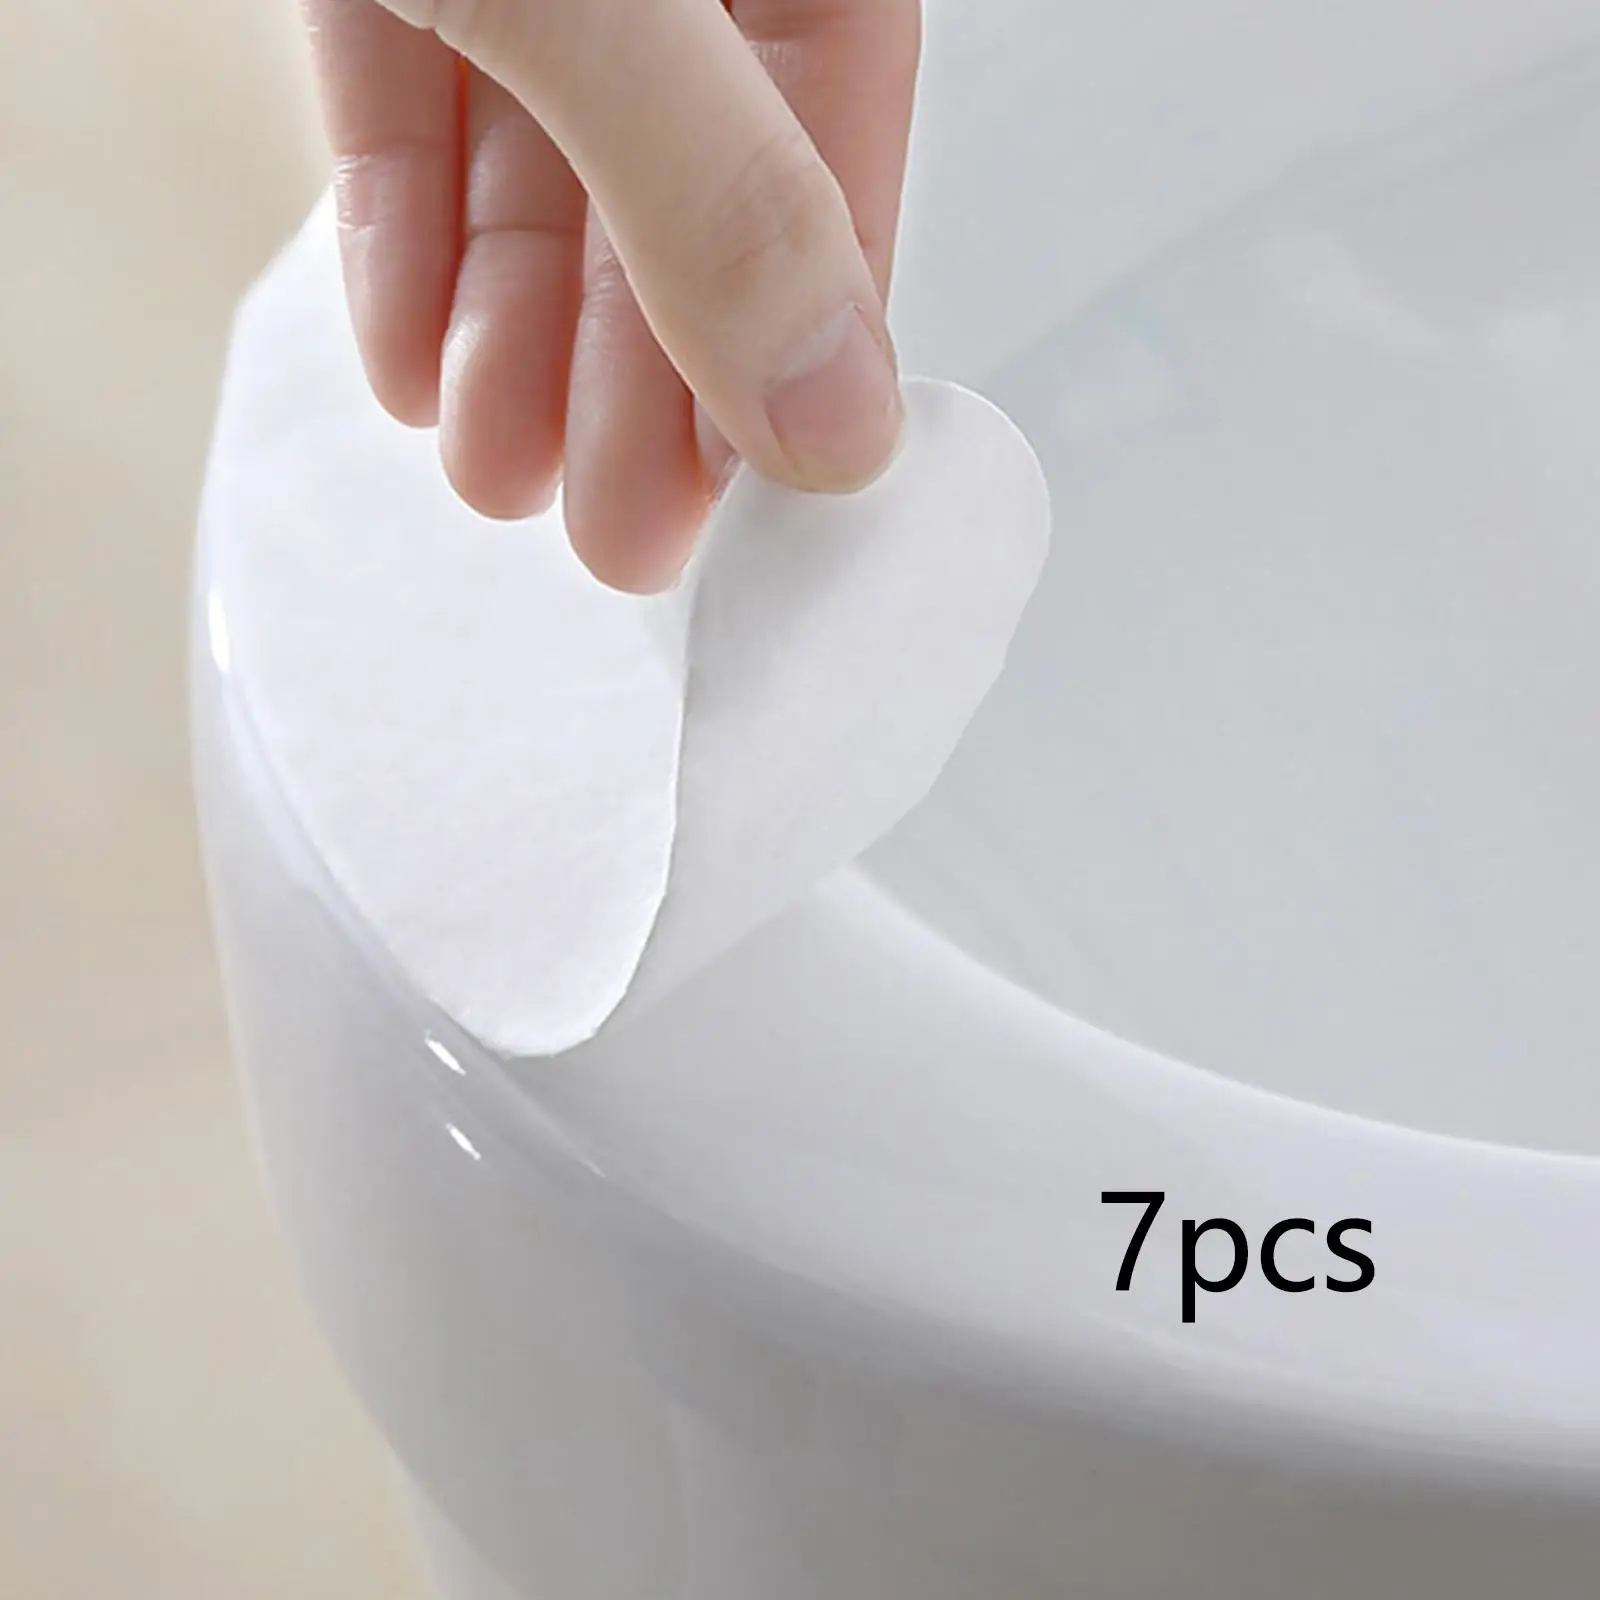 Toilet Anti Pad to Prevent Spatter Bathroom Accessories Toilet Pad Mute Pad Toilet Separator for Camping Toddler Kids